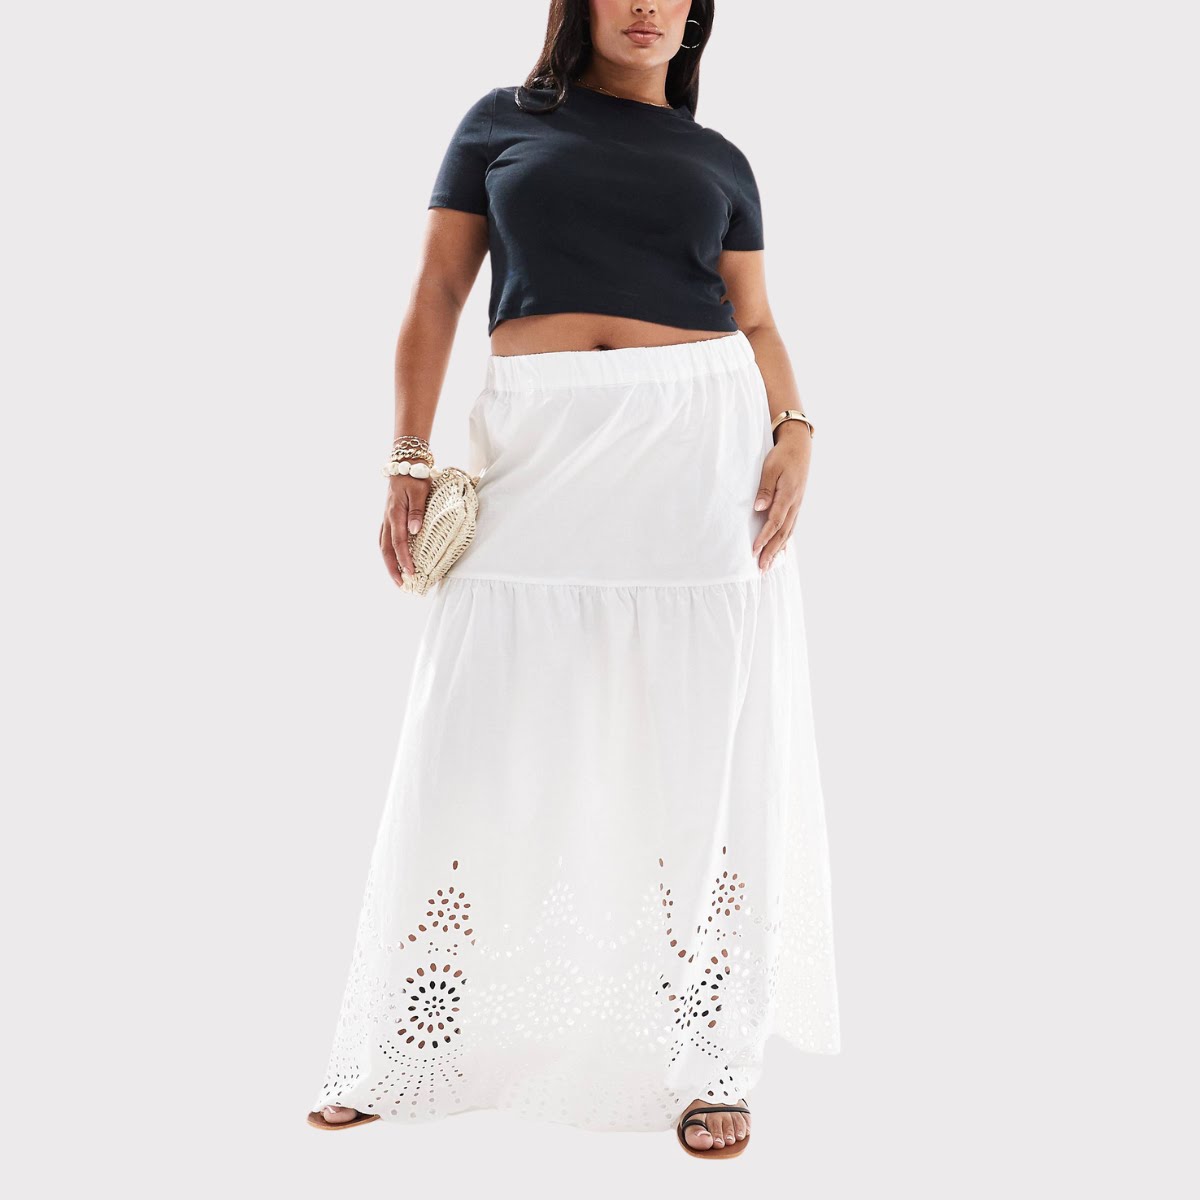 Only Embroidered Tiered Maxi Skirt, €65.99ASOS